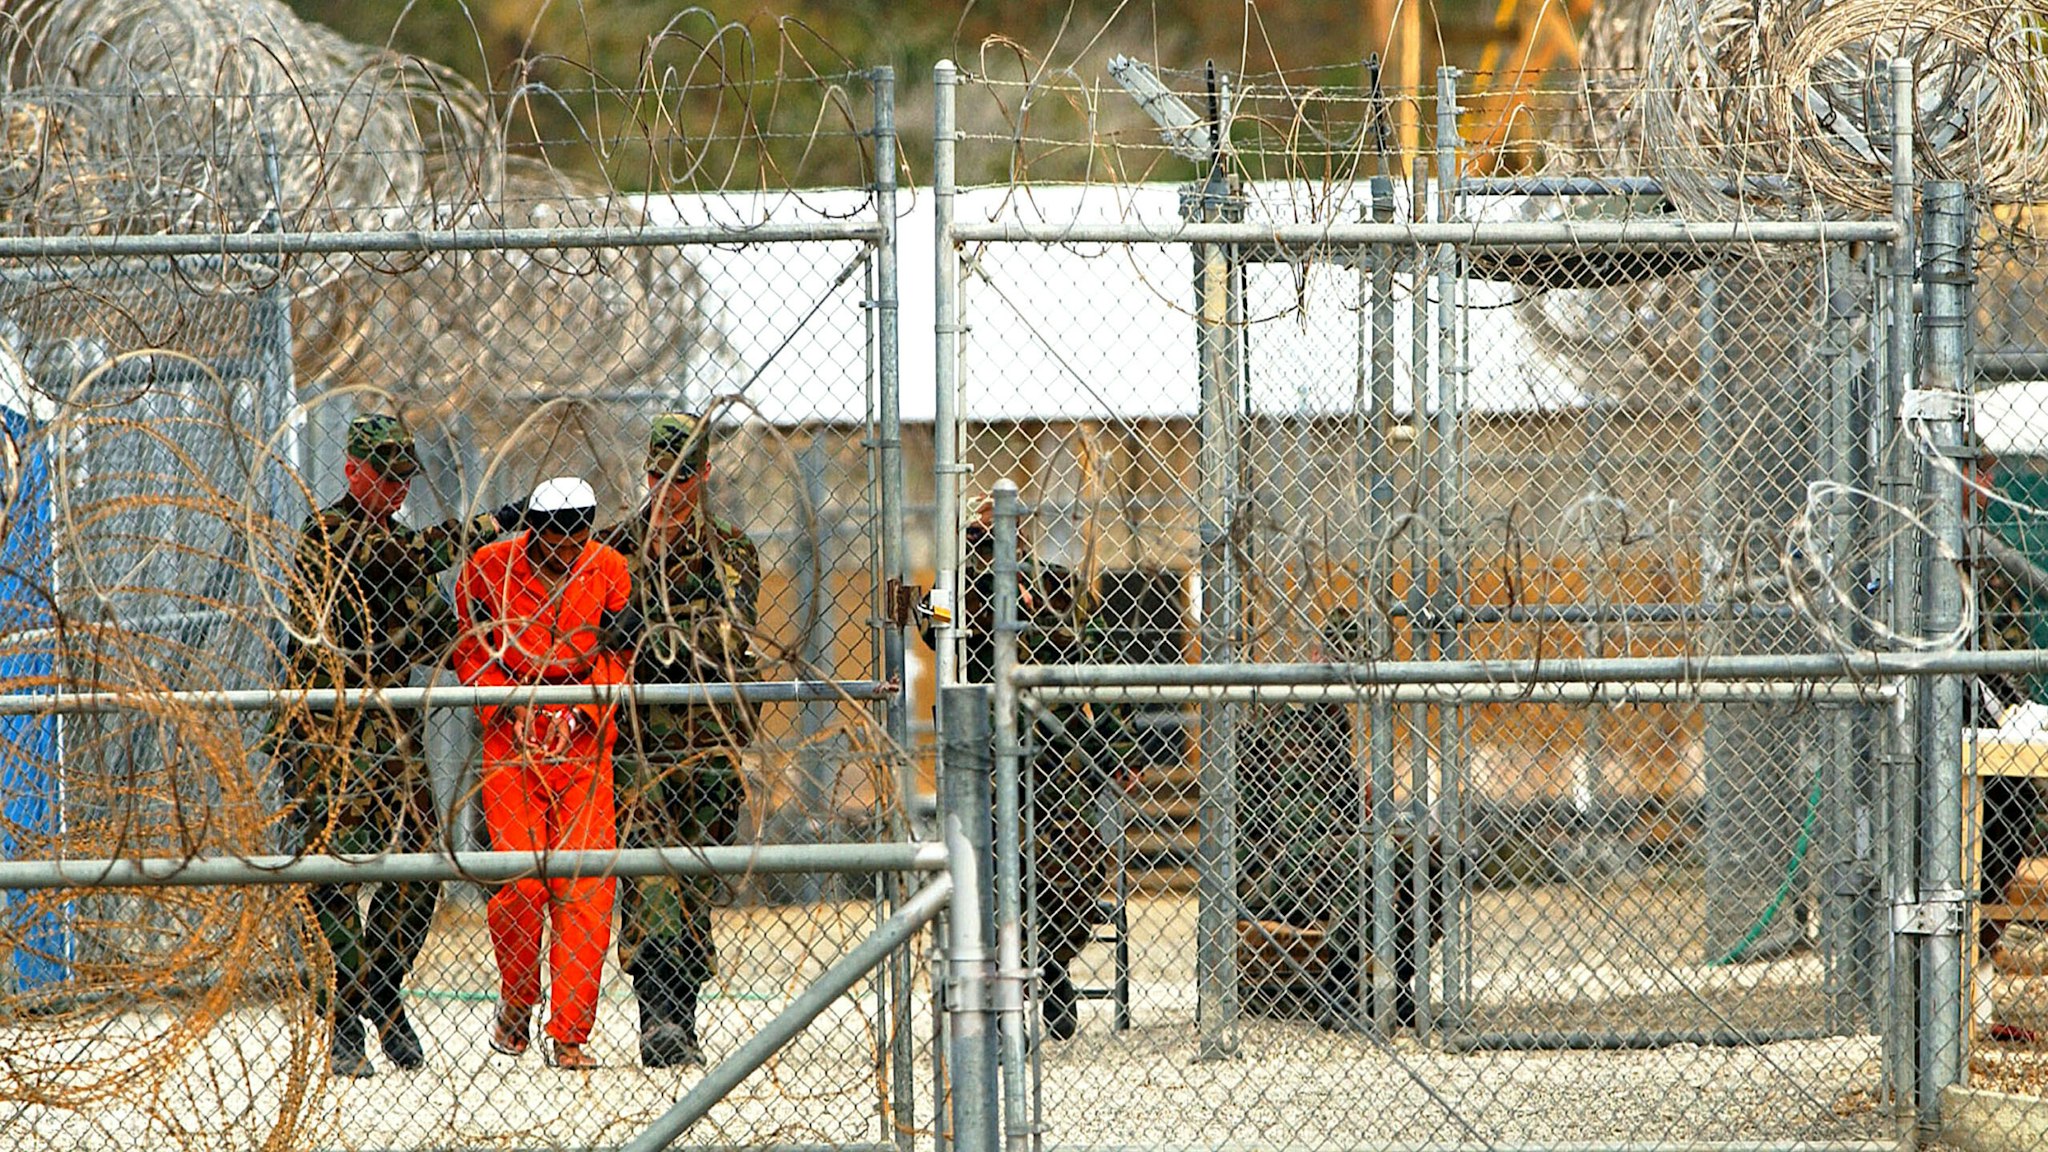 400671 17: Marines transport a detainee behind layers of fencing and razorwire in Camp X-Ray February 6, 2002 in Guantanamo Bay, Cuba. Some of the 156 Al-Qaeda or Taliban detainees are transported periodically for interrogations and other events. U.S. President George W. Bush determined February 7 that the Geneva Convention applies to the conflict in Afghanistan and Taliban soldiers, but not al-Qaeda fighters and other terrorists, the White House said.